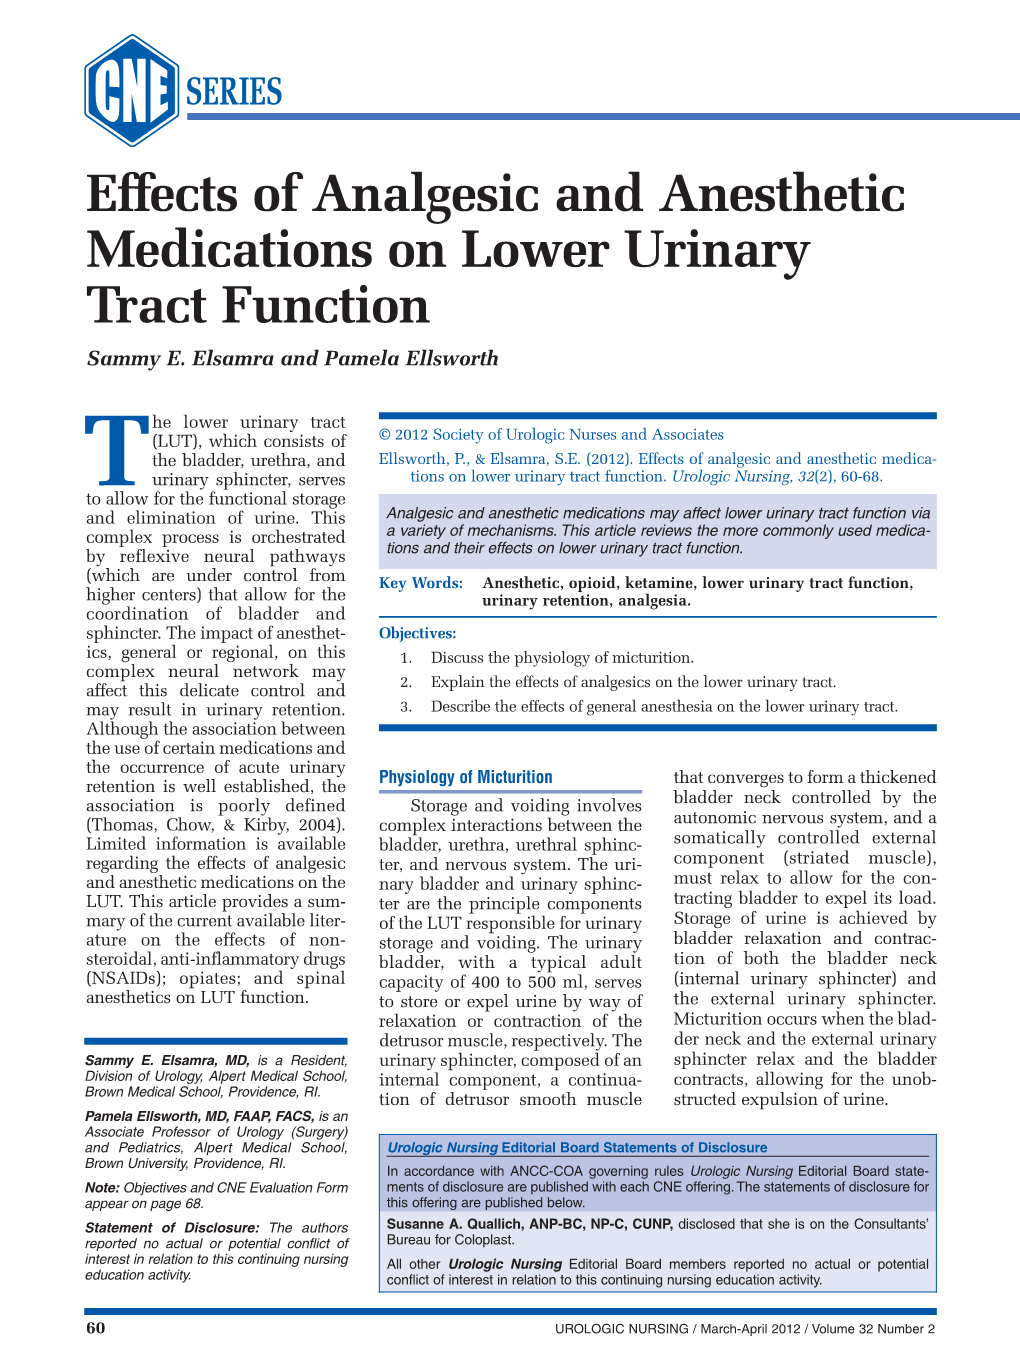 Effects of Analgesic and Anesthetic Medications on Lower Urinary Tract Function Sammy E